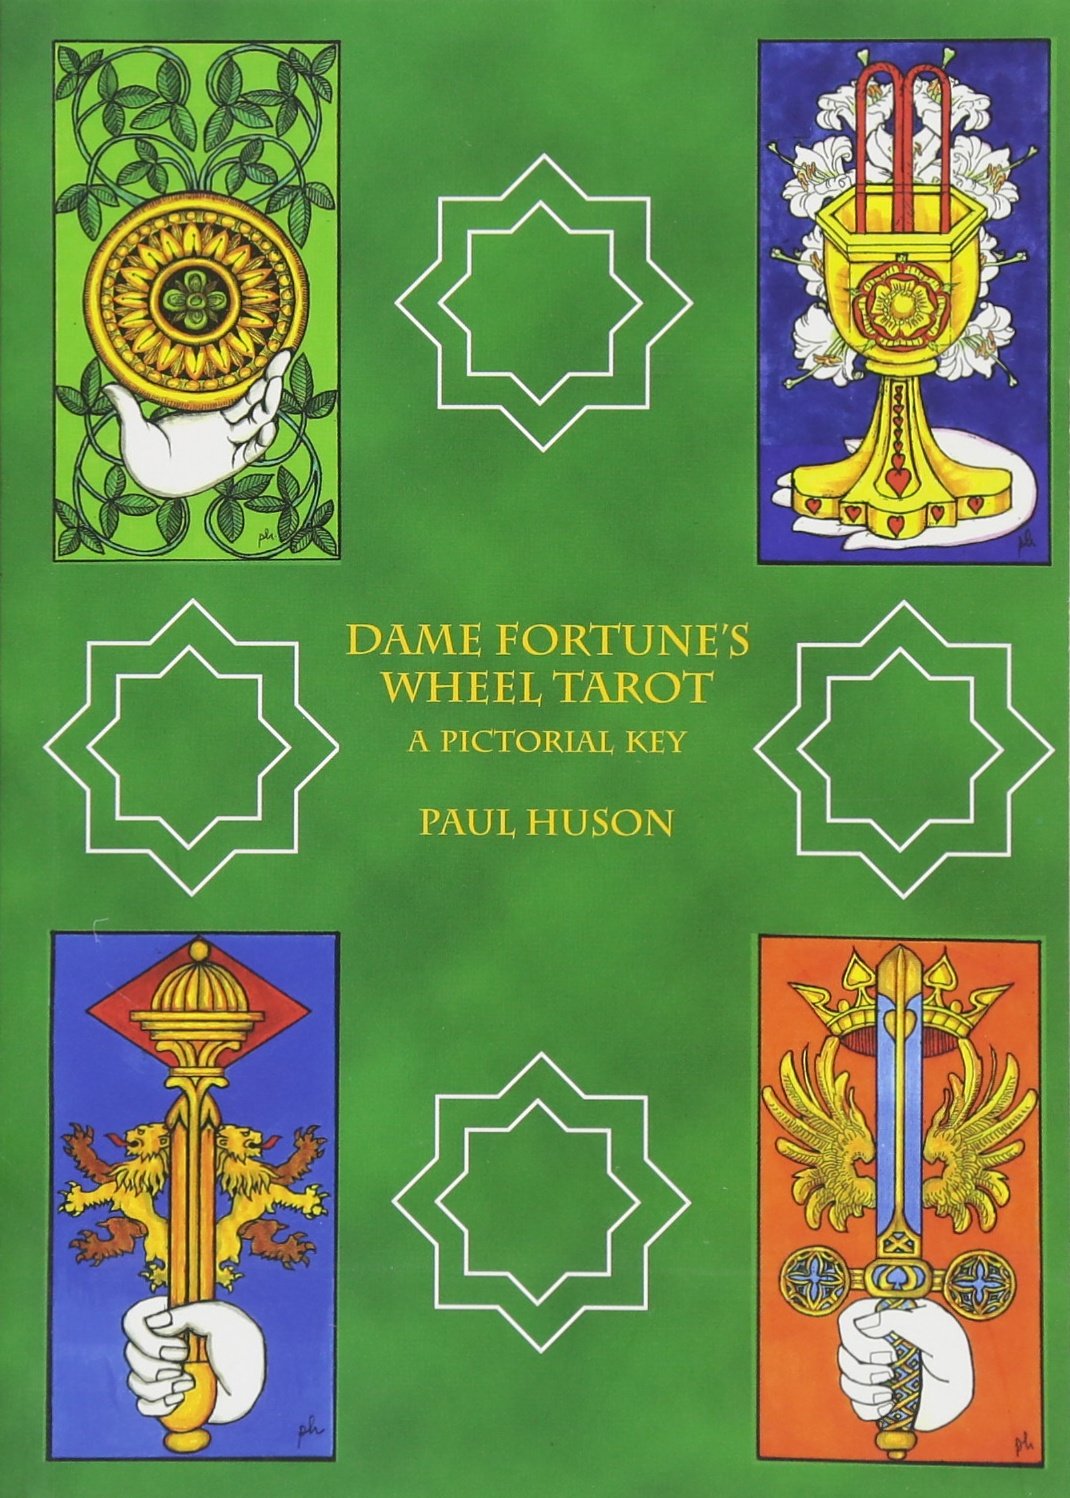 Paul Huson: Dame Fortune's Wheel Tarot (2017, Witches Almanac Limited, The)